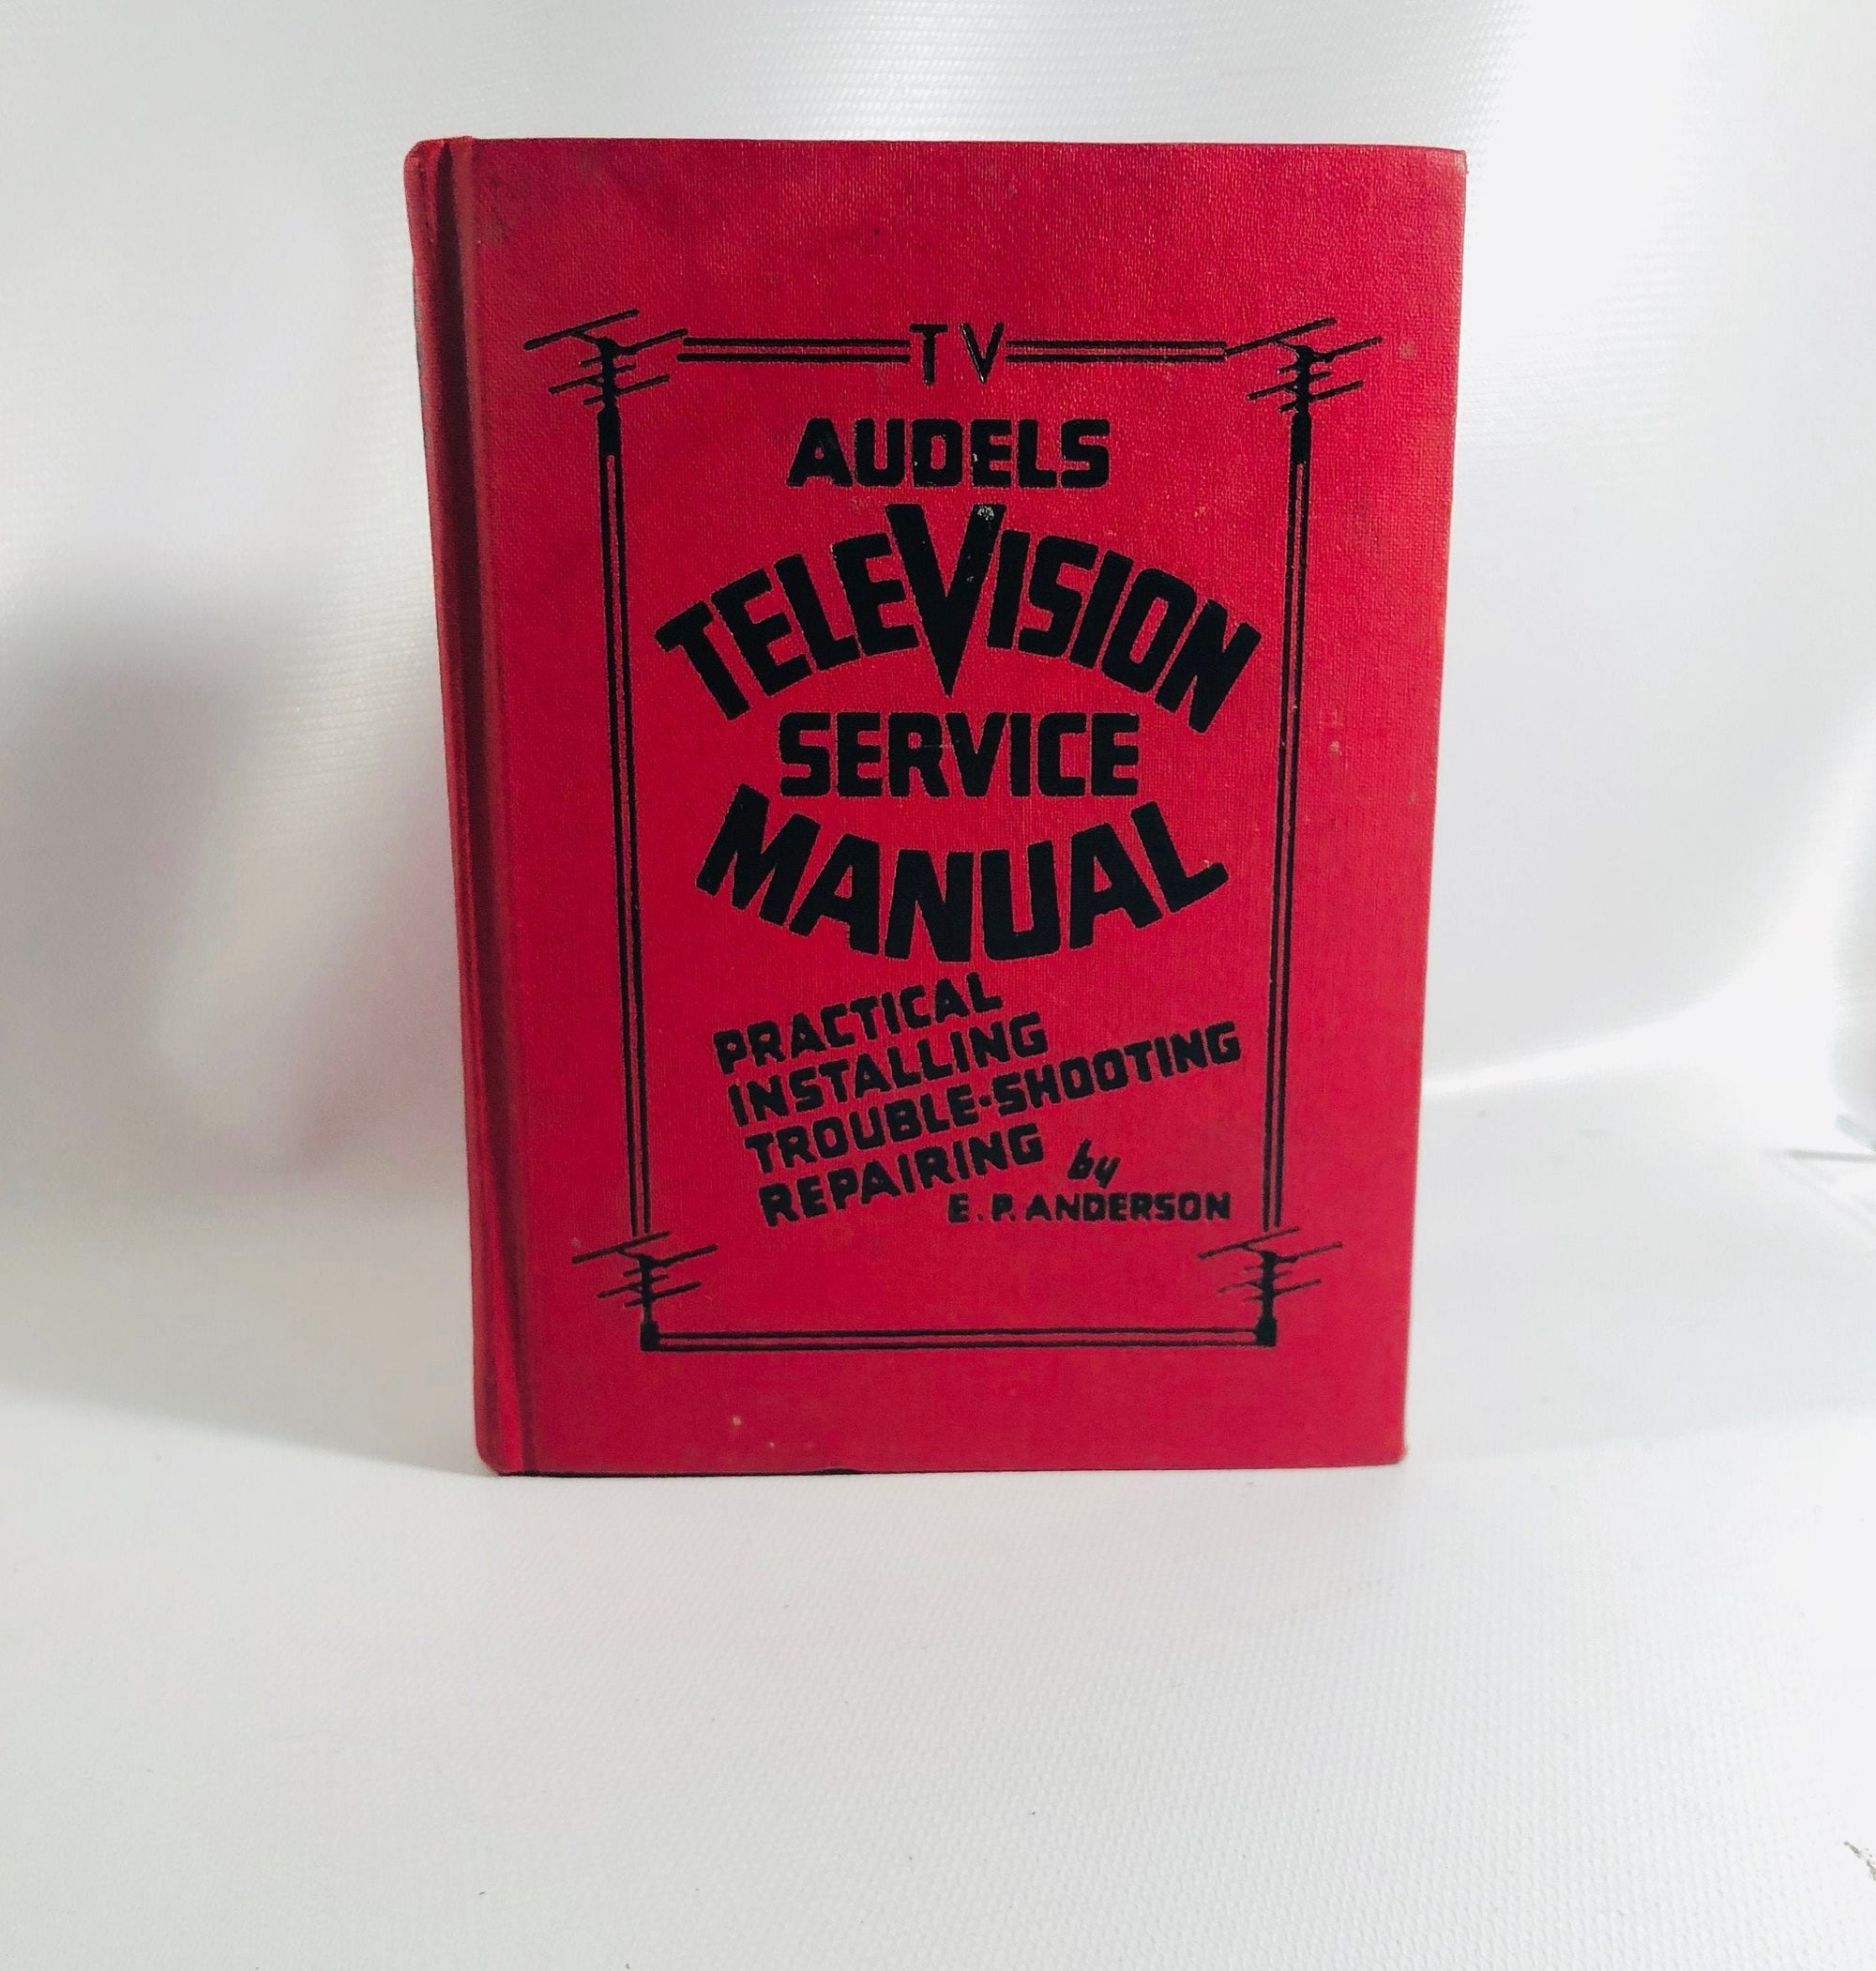 Vintage Audels Television Service Manual Practical Installing Trouble-Shooting Repairing by E.P.Anderson 1953